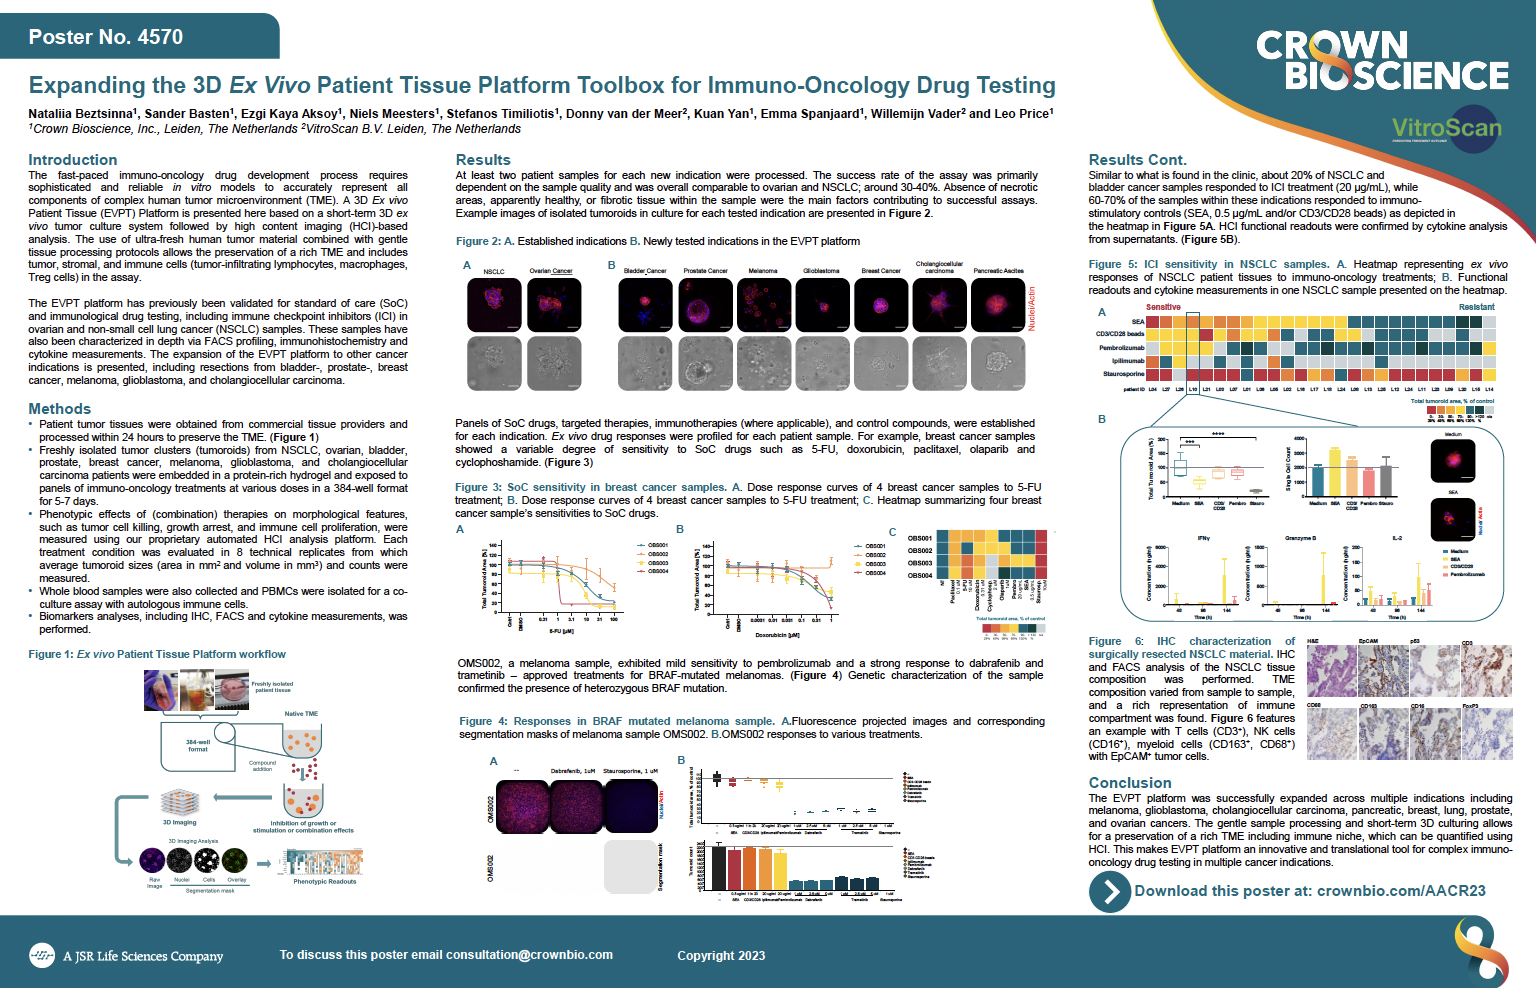 AACR 2023 Posters 4570: Expanding the 3D Ex Vivo Patient Tissue Platform Toolbox for Immuno-Oncology Drug Testing